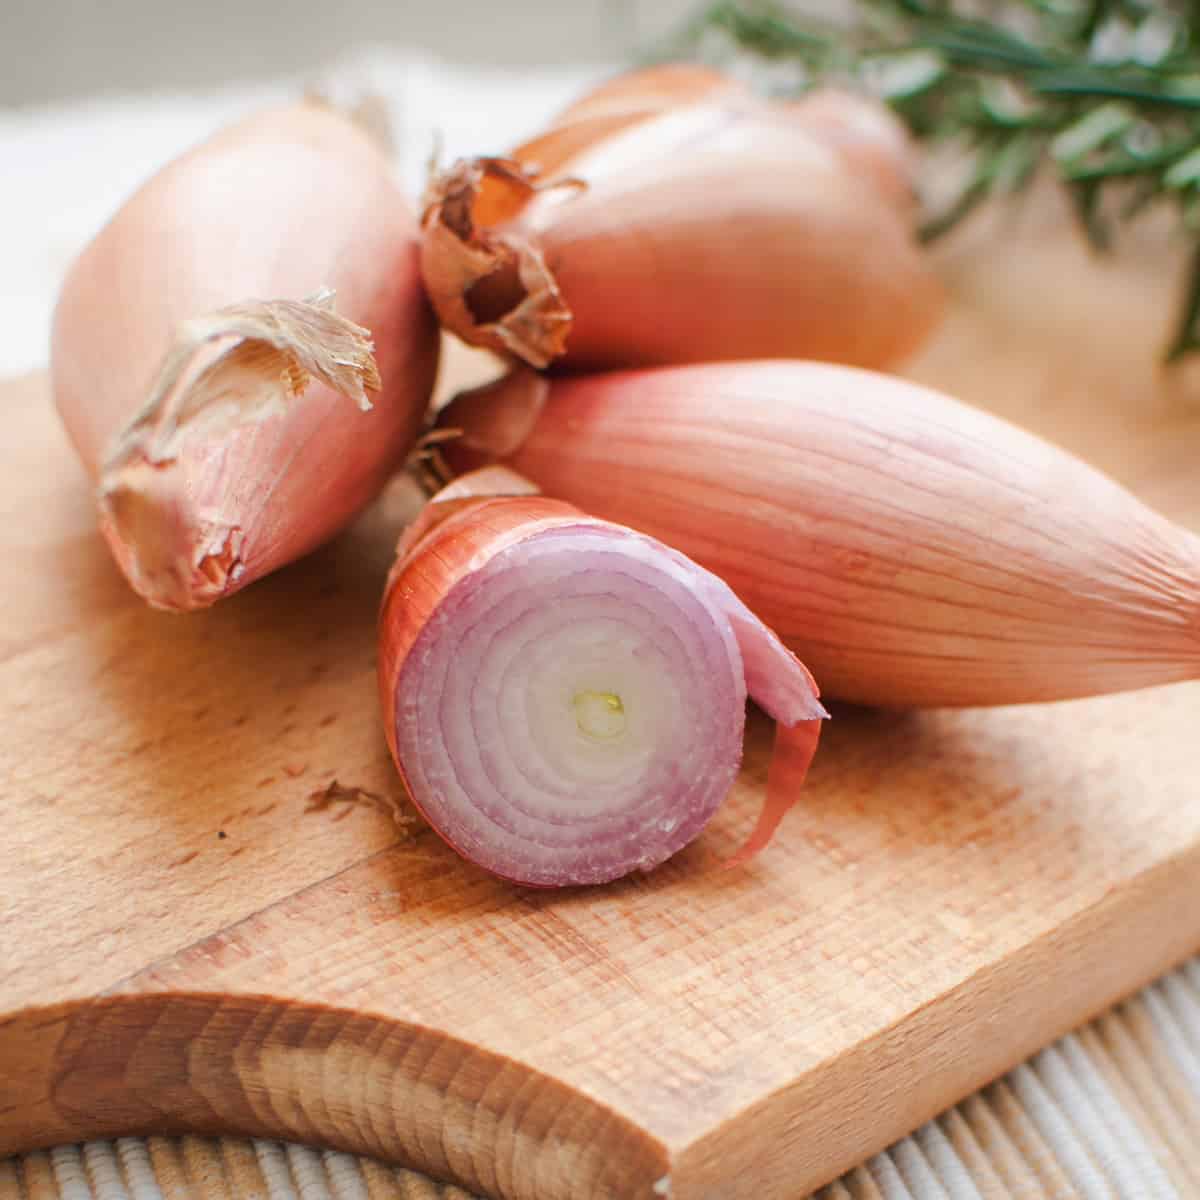 4 shallots on a small cutting board, one is cut in half